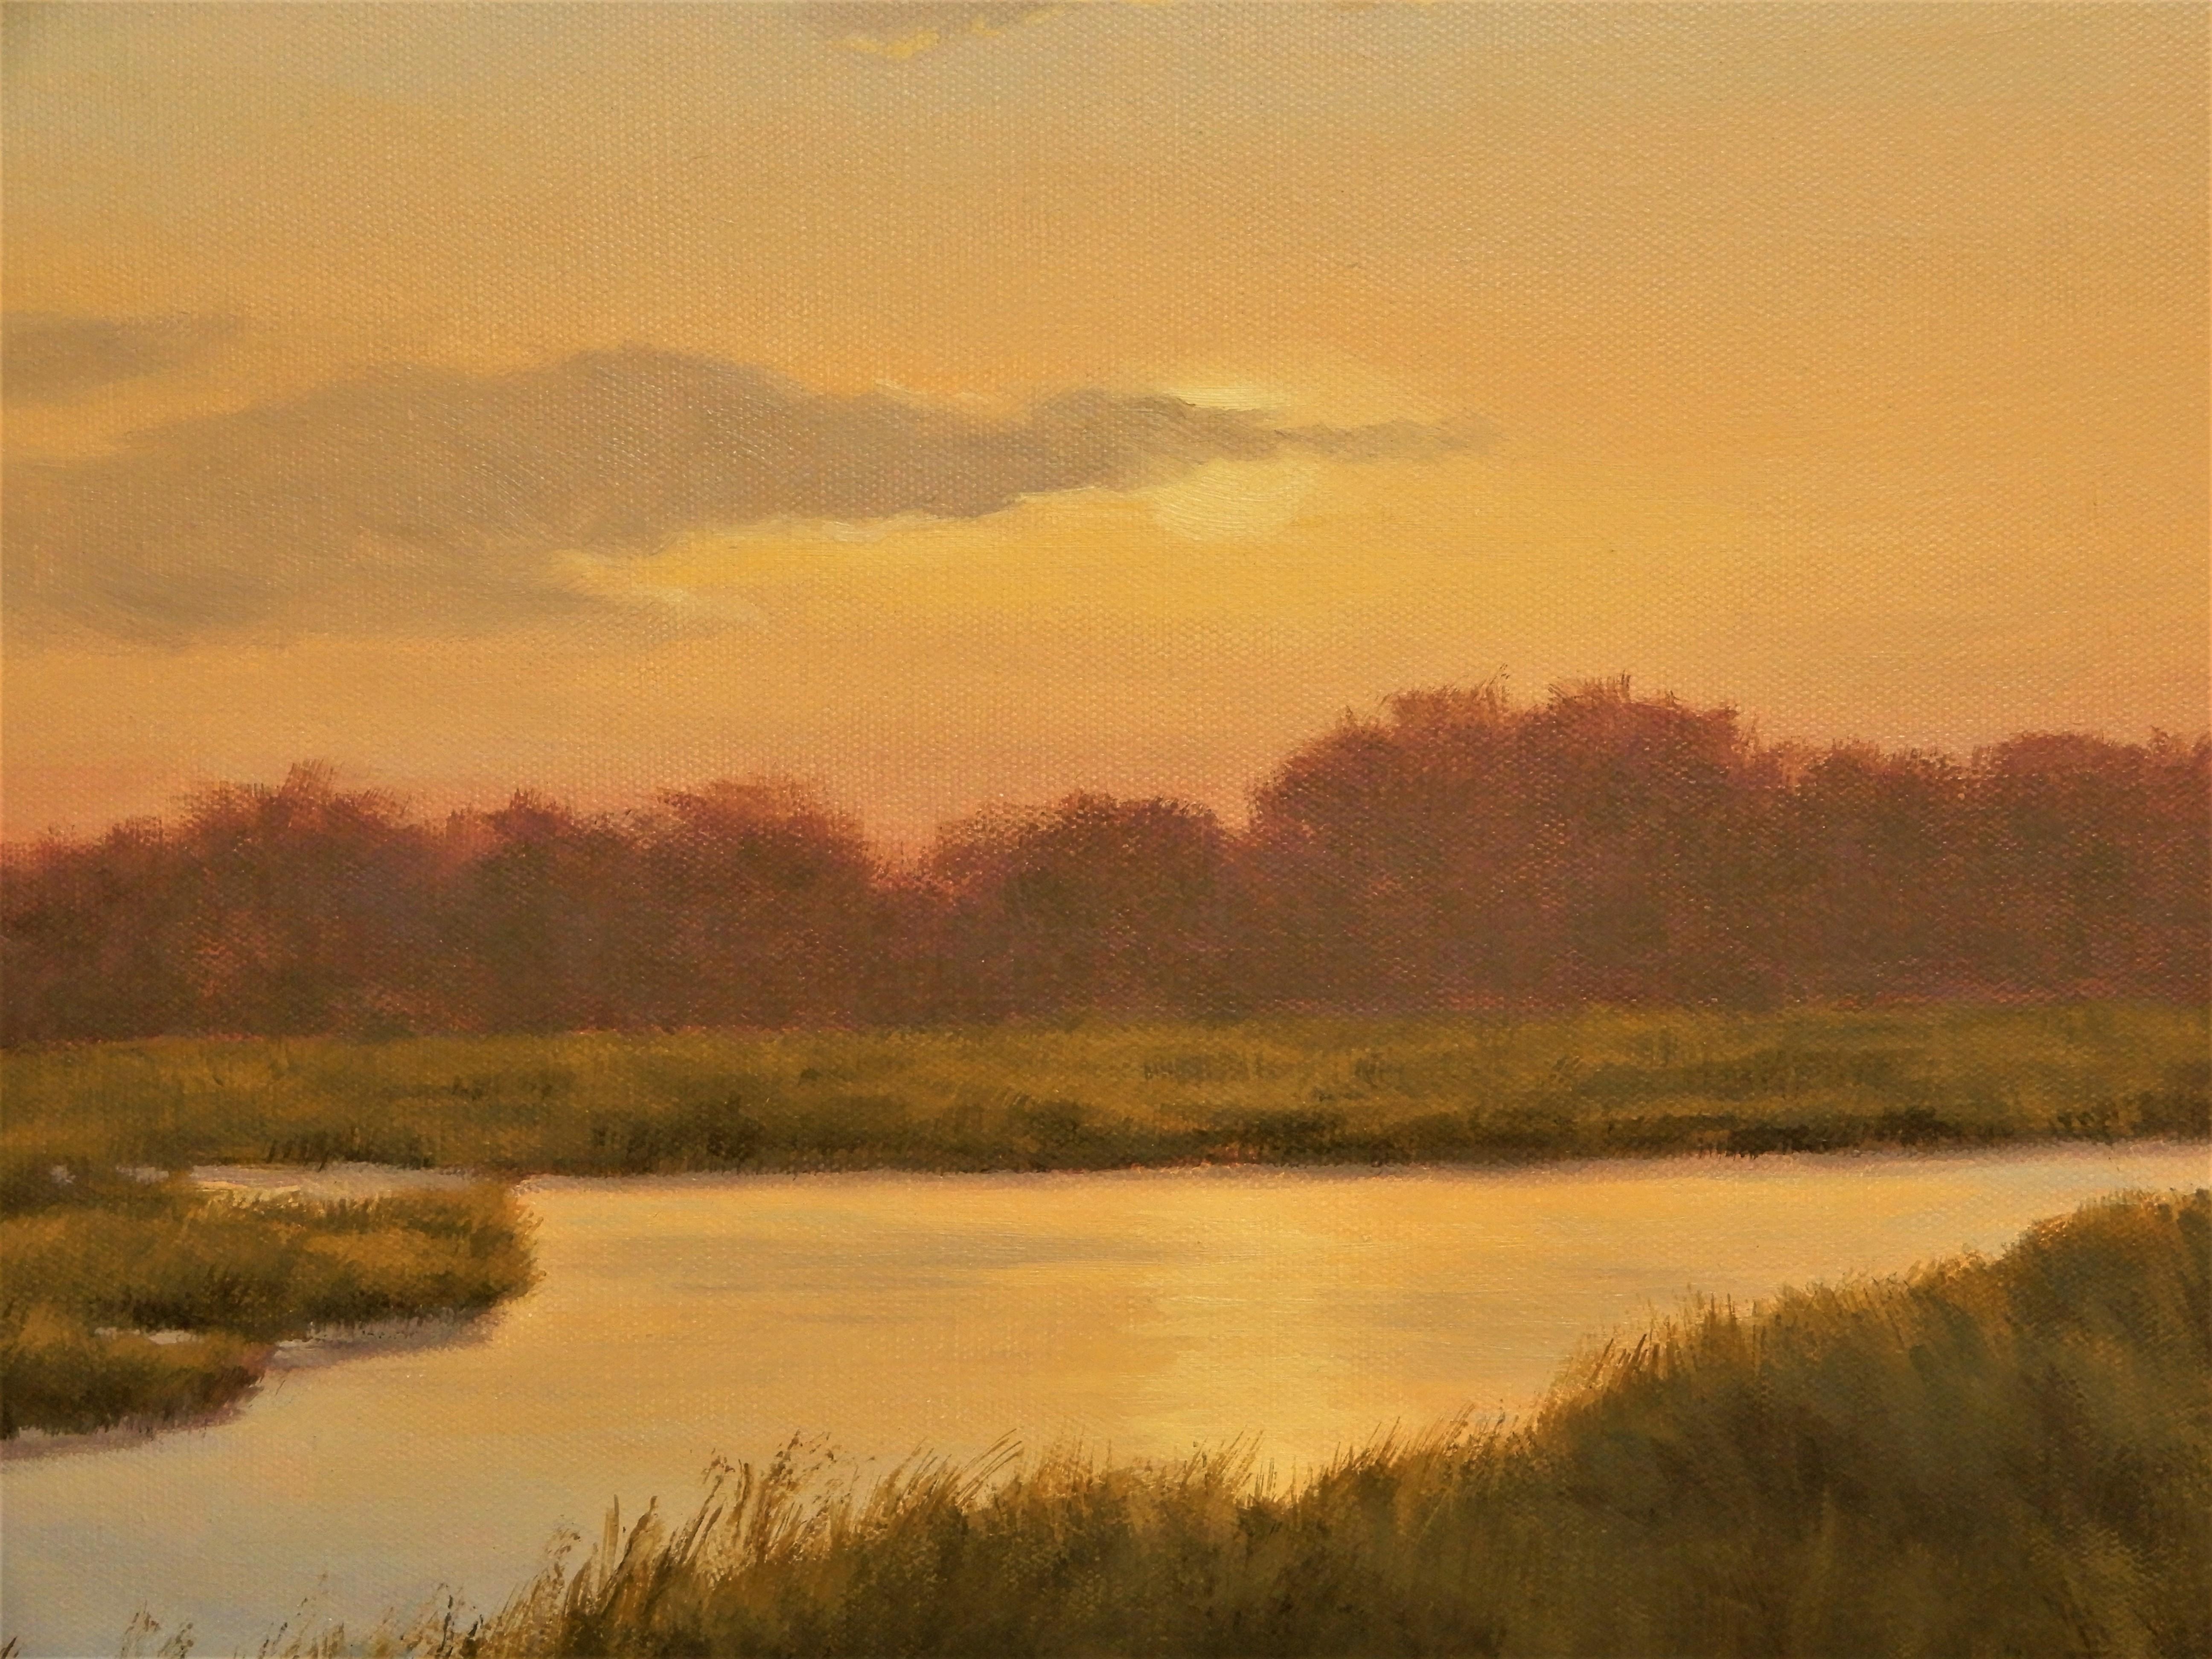 Sunset River, Oil Painting - Brown Landscape Painting by Robert Pennor